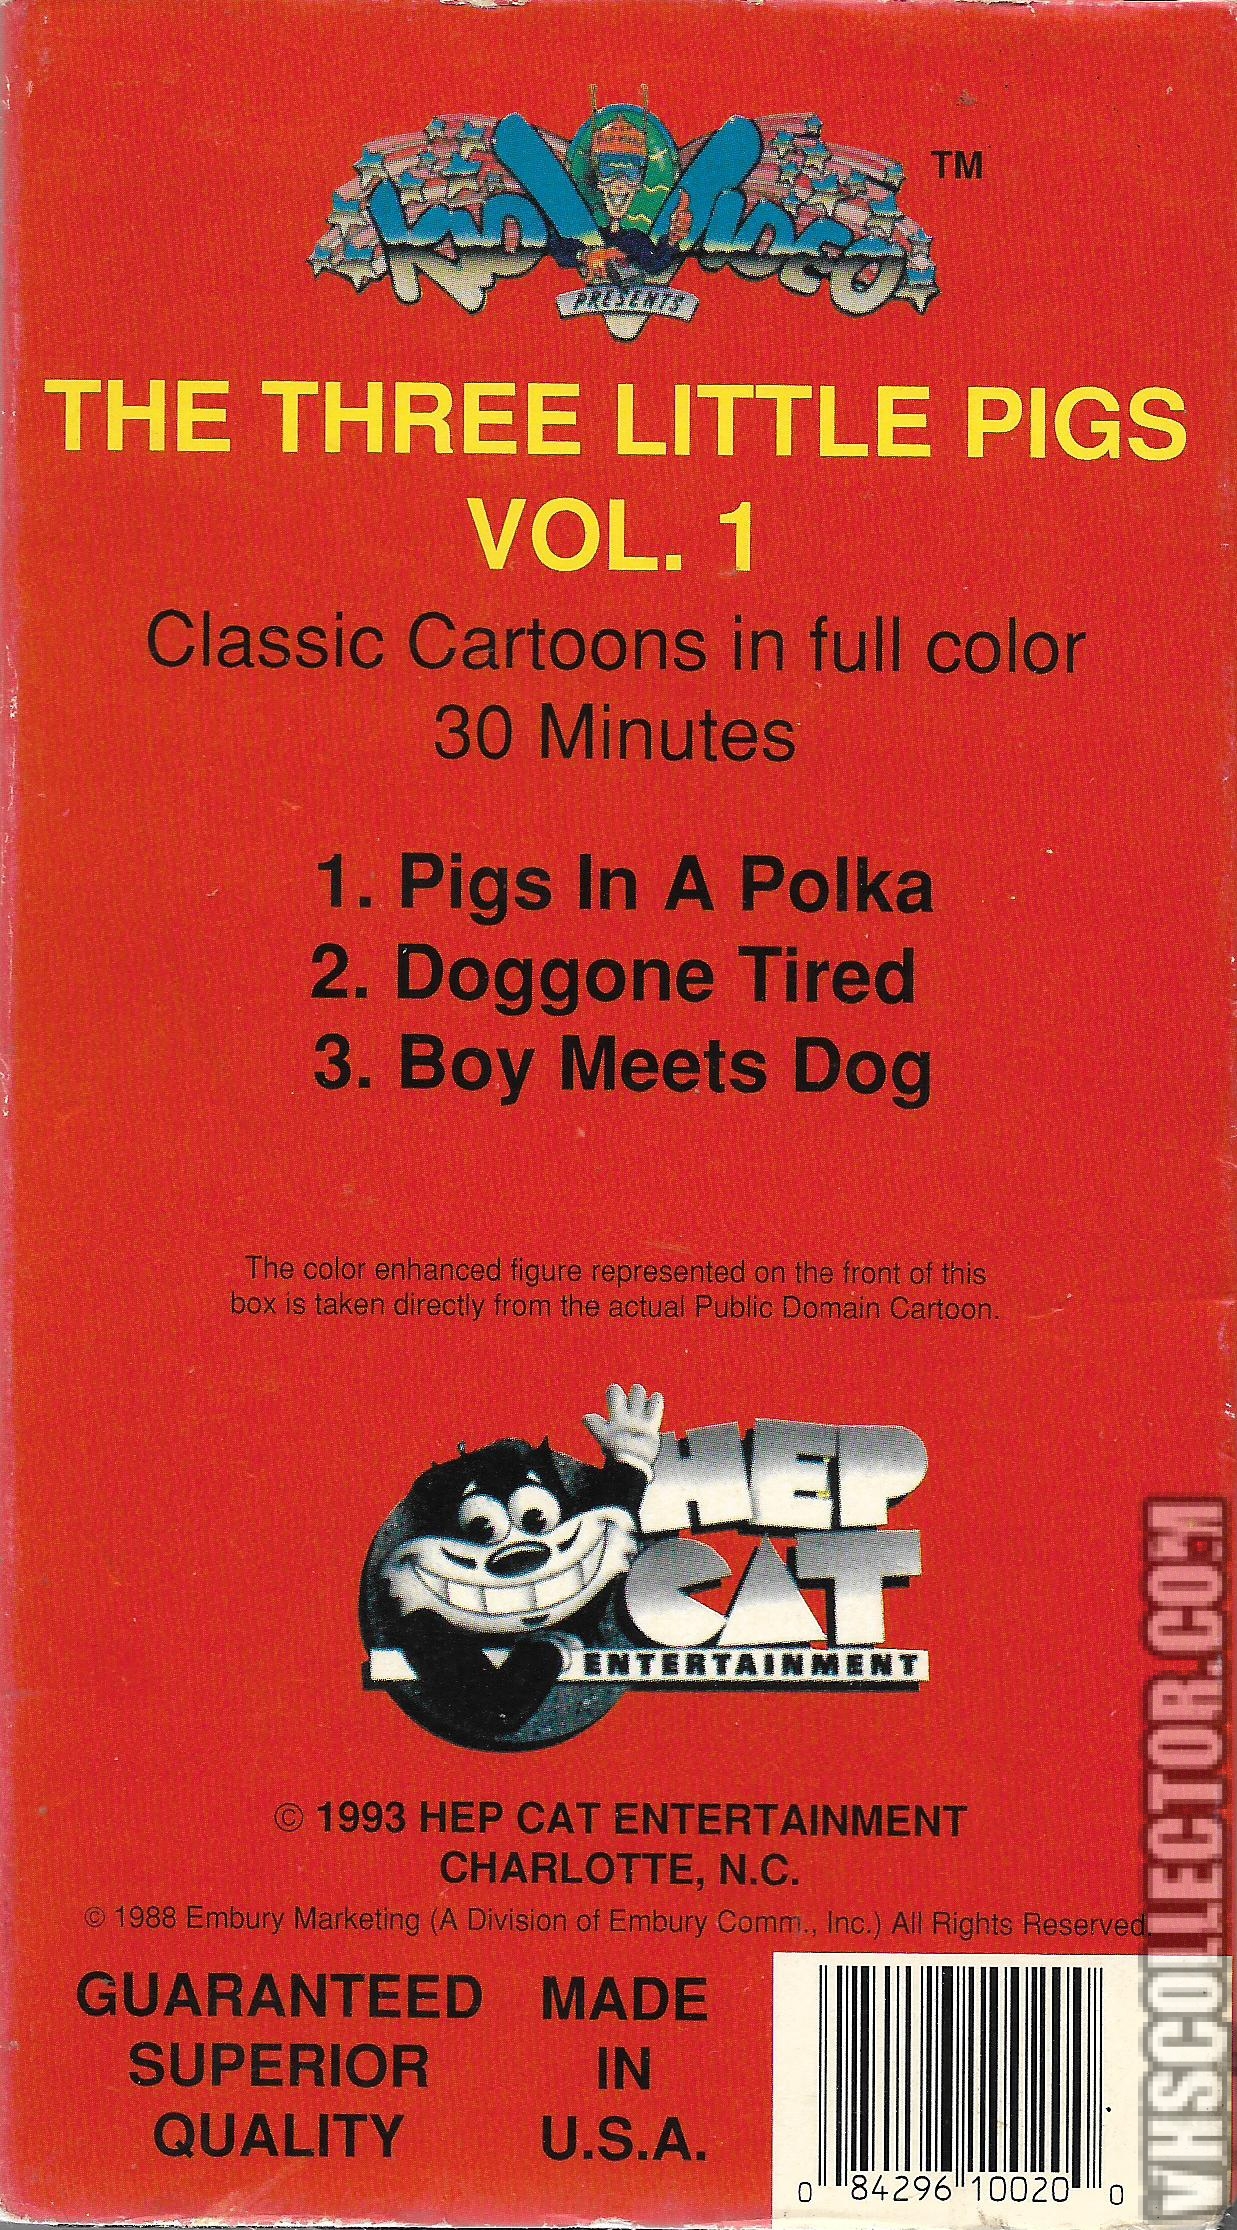 The Three Little Pigs | VHSCollector.com - Your Analog Videotape Archive